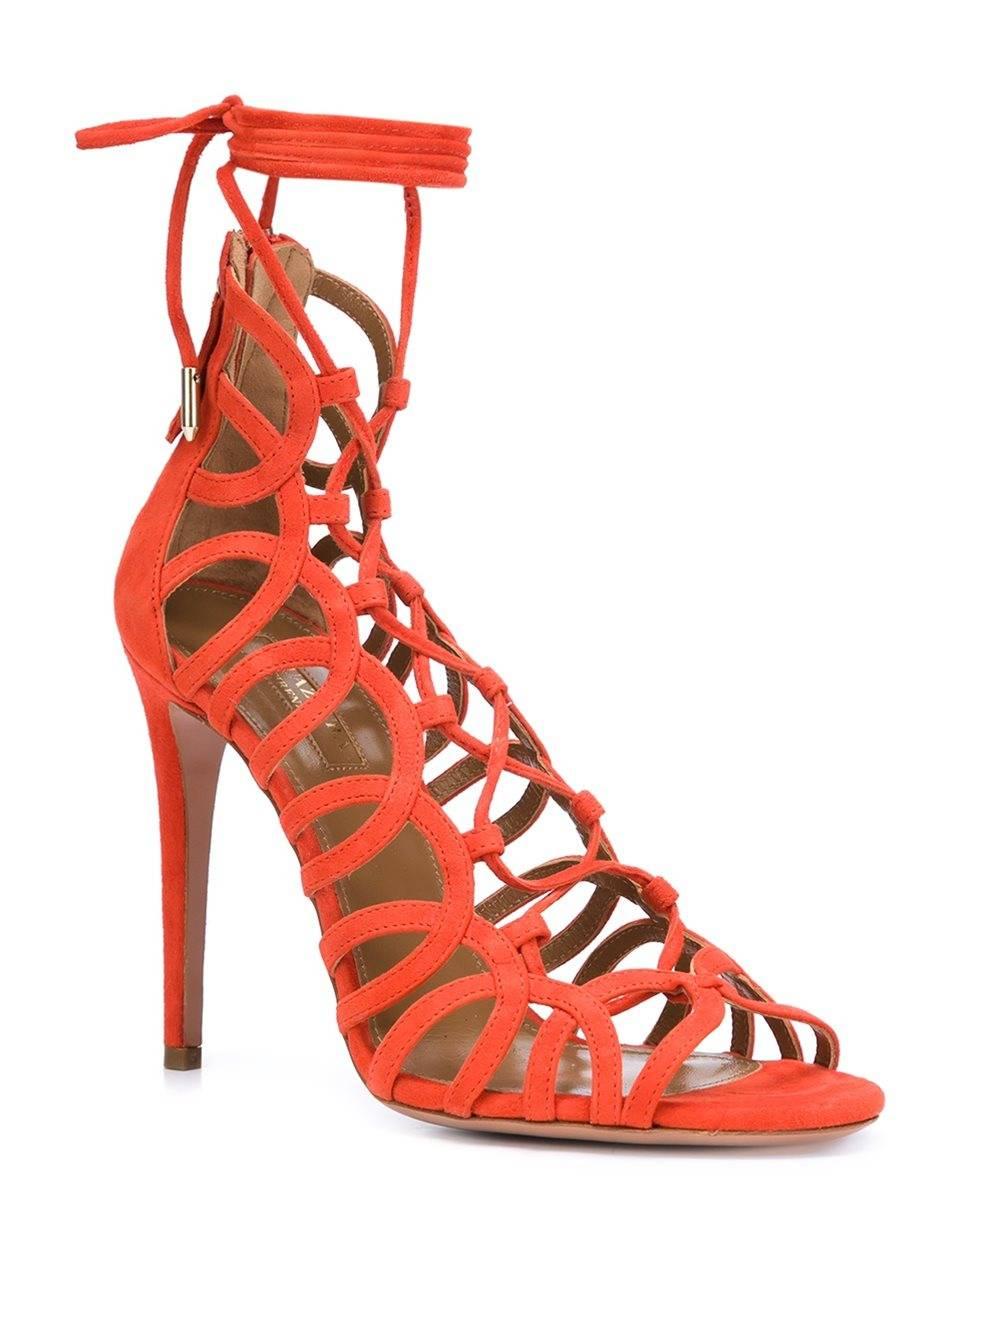 CURATOR'S NOTES

Aquazzura New Orange  Suede Cut Out Lace Up Gladiator Heels Sandals in Box  

Size IT 36
Suede
Zipper back and lace up closure
Made in Italy
Heel height 4